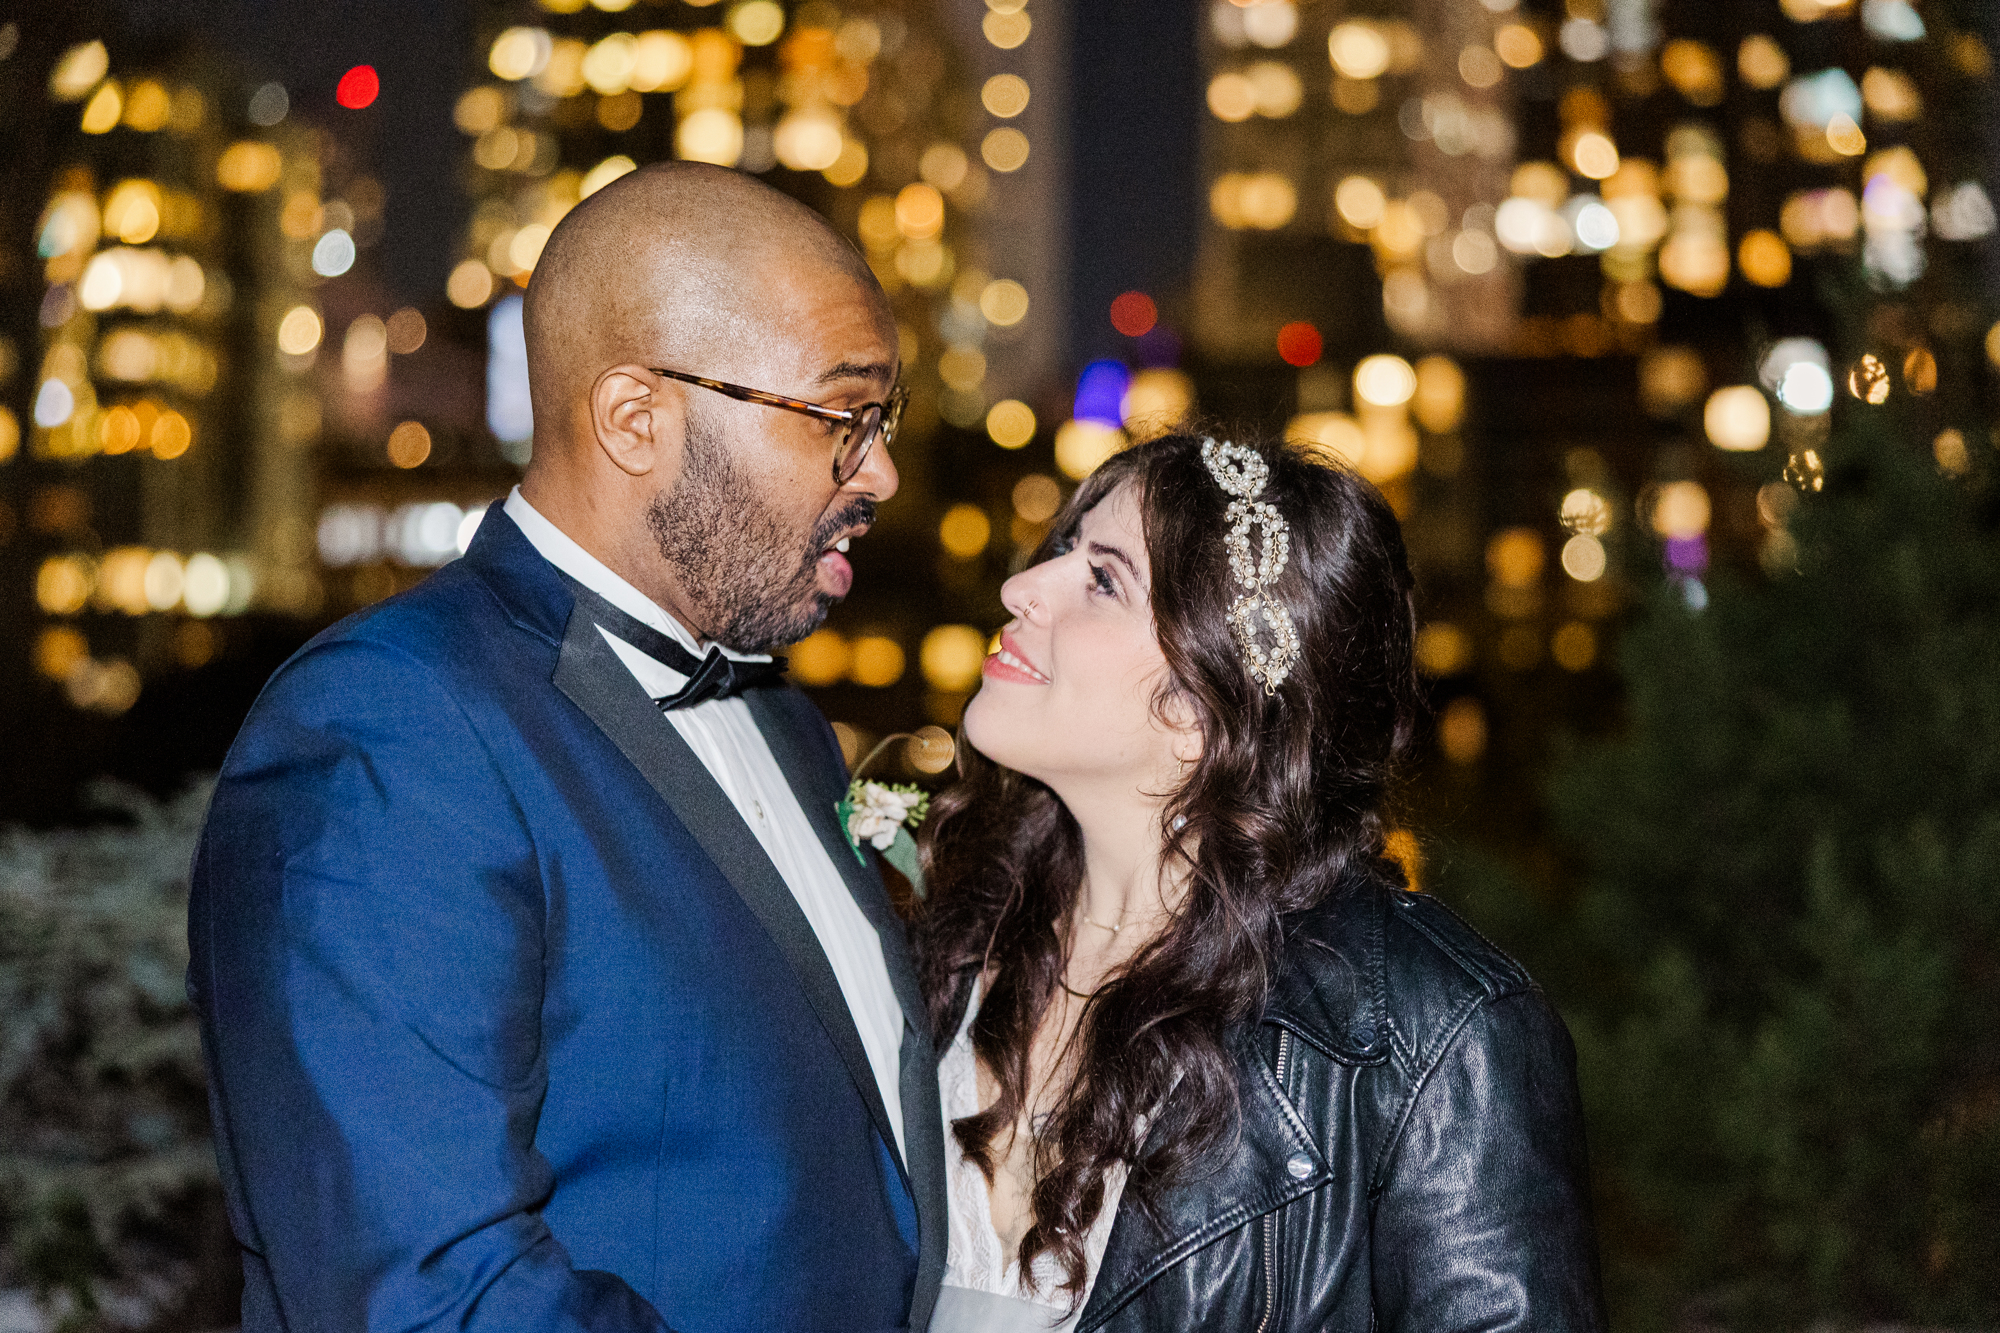 Dazzling Deity Wedding Photography at Unique Event Space in Downtown Brooklyn in Autumn